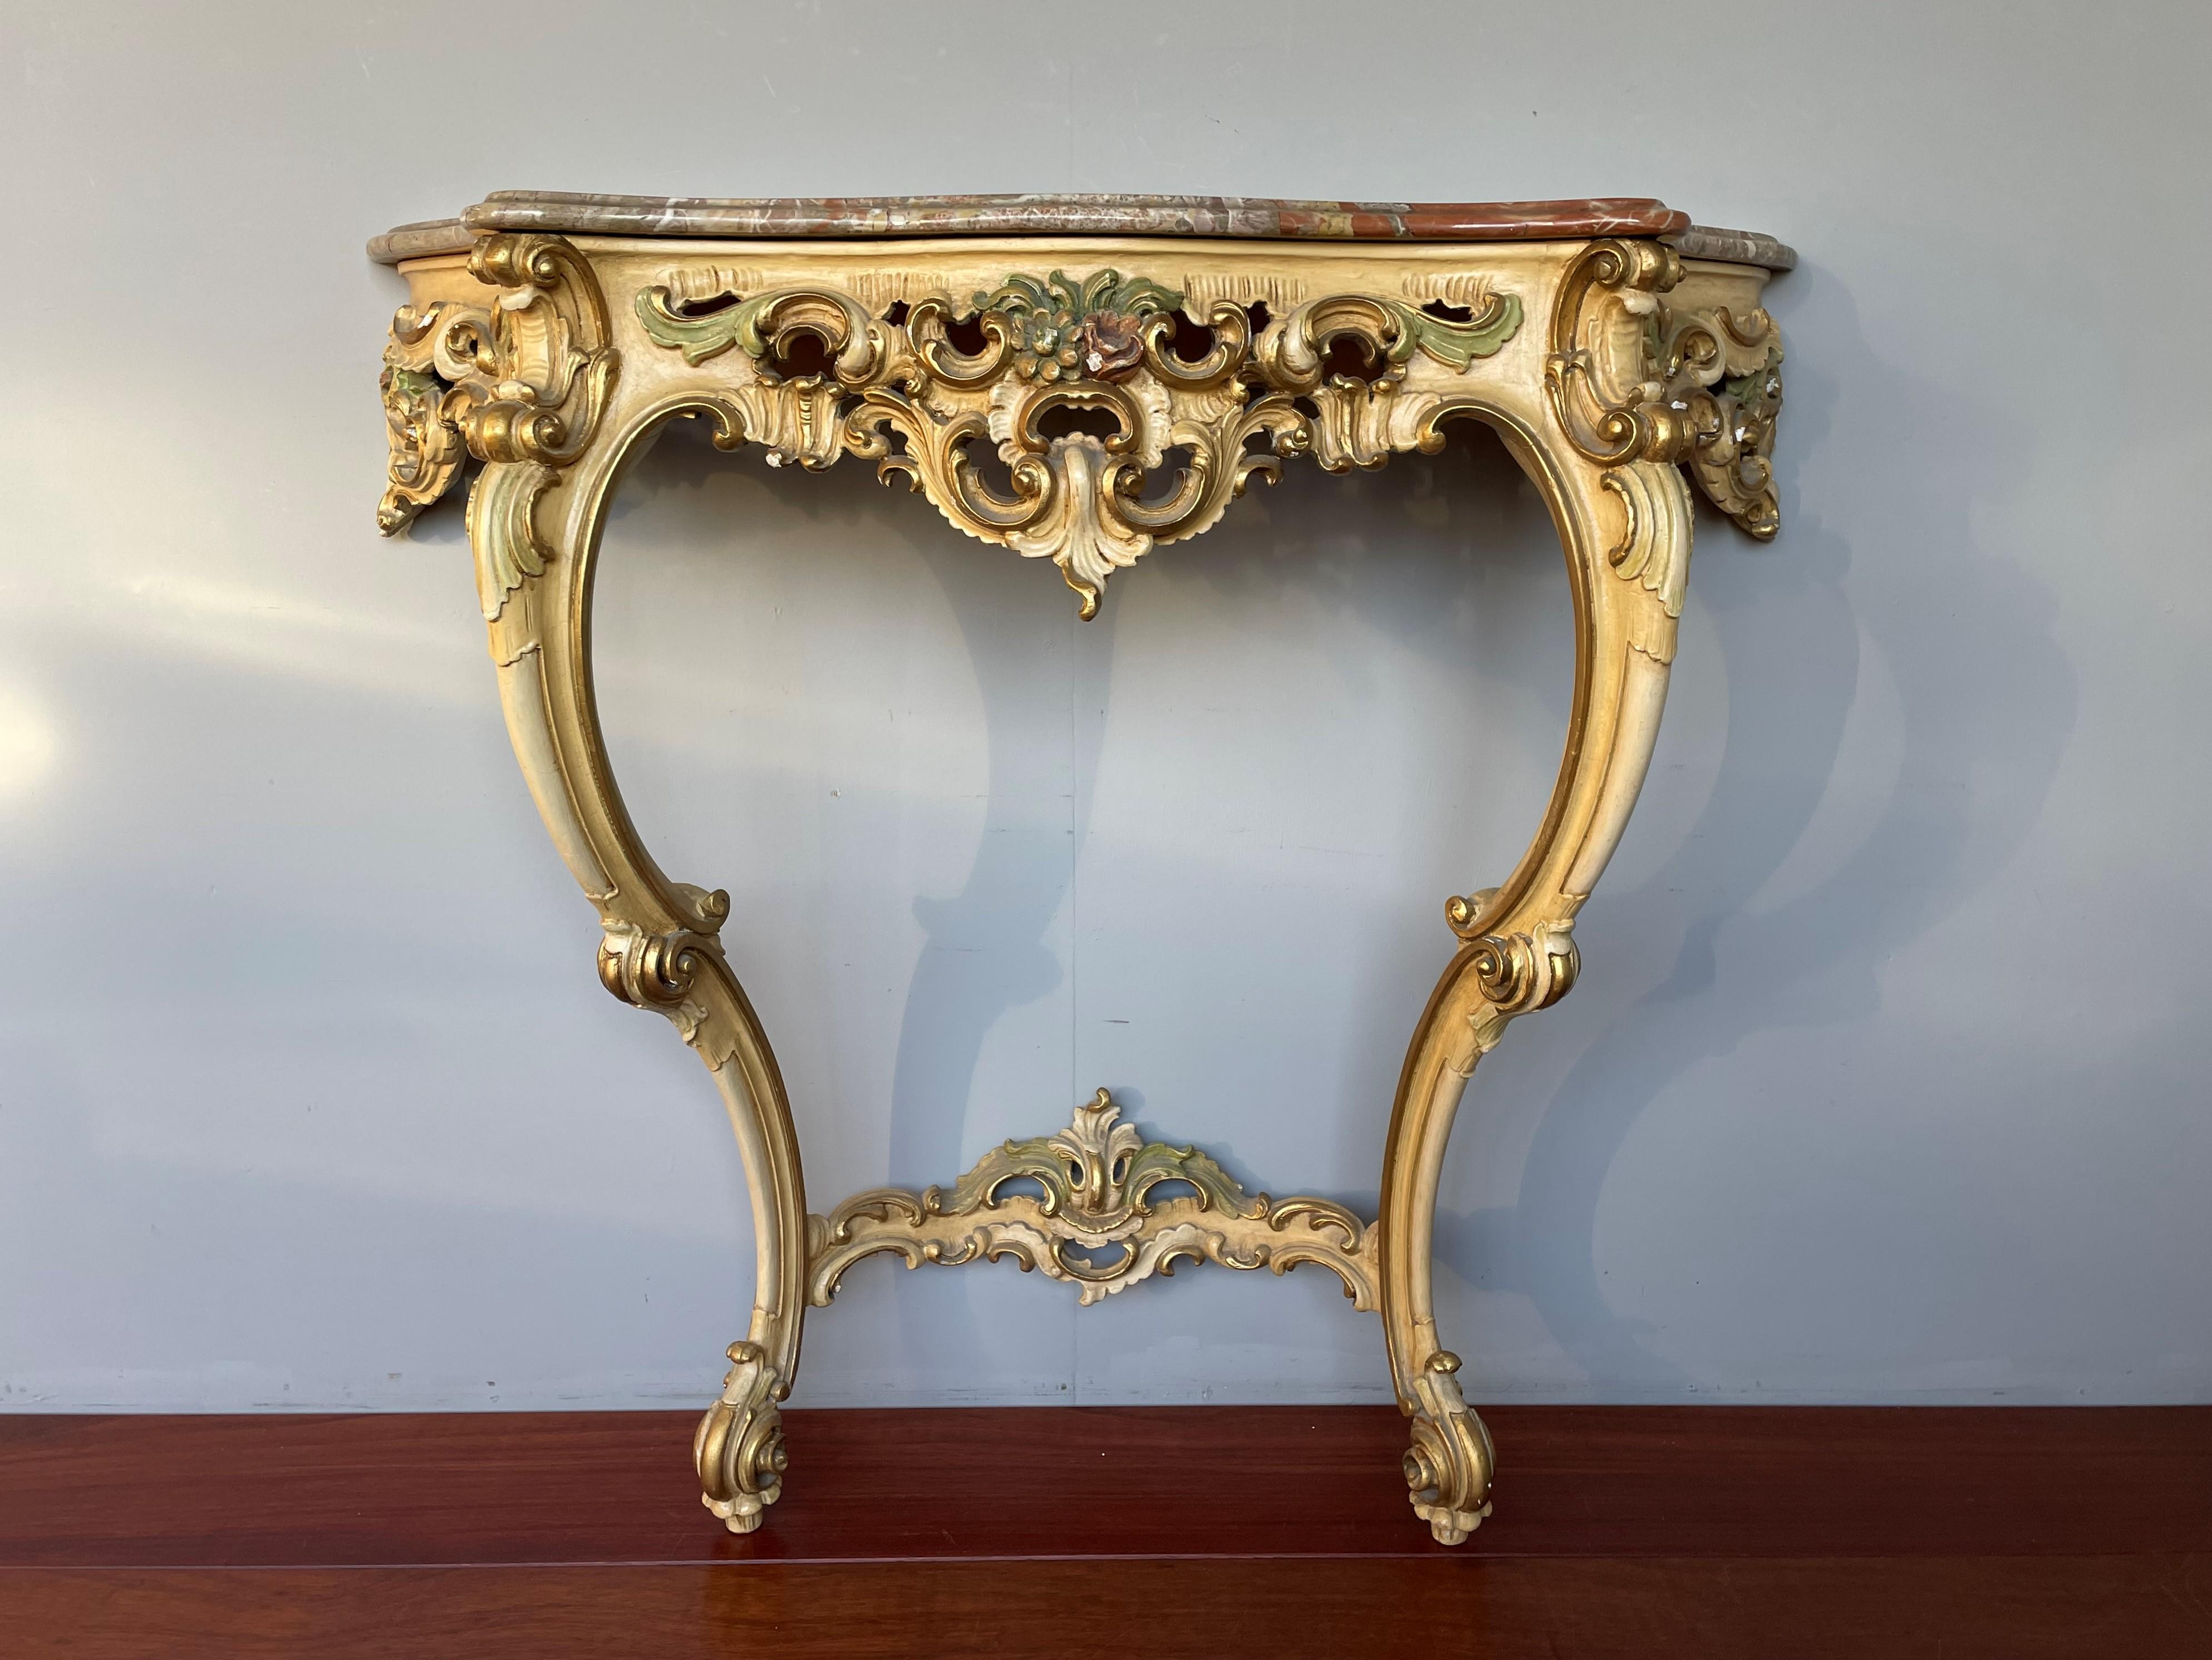 Beautifully handcrafted and wonderfully sculptural Venetian sidetable with rare colors marble top.

This semi antique and finer quality carved side table comes with a stunning and mint condition, 'curvy beveled' marble top. The overal design is